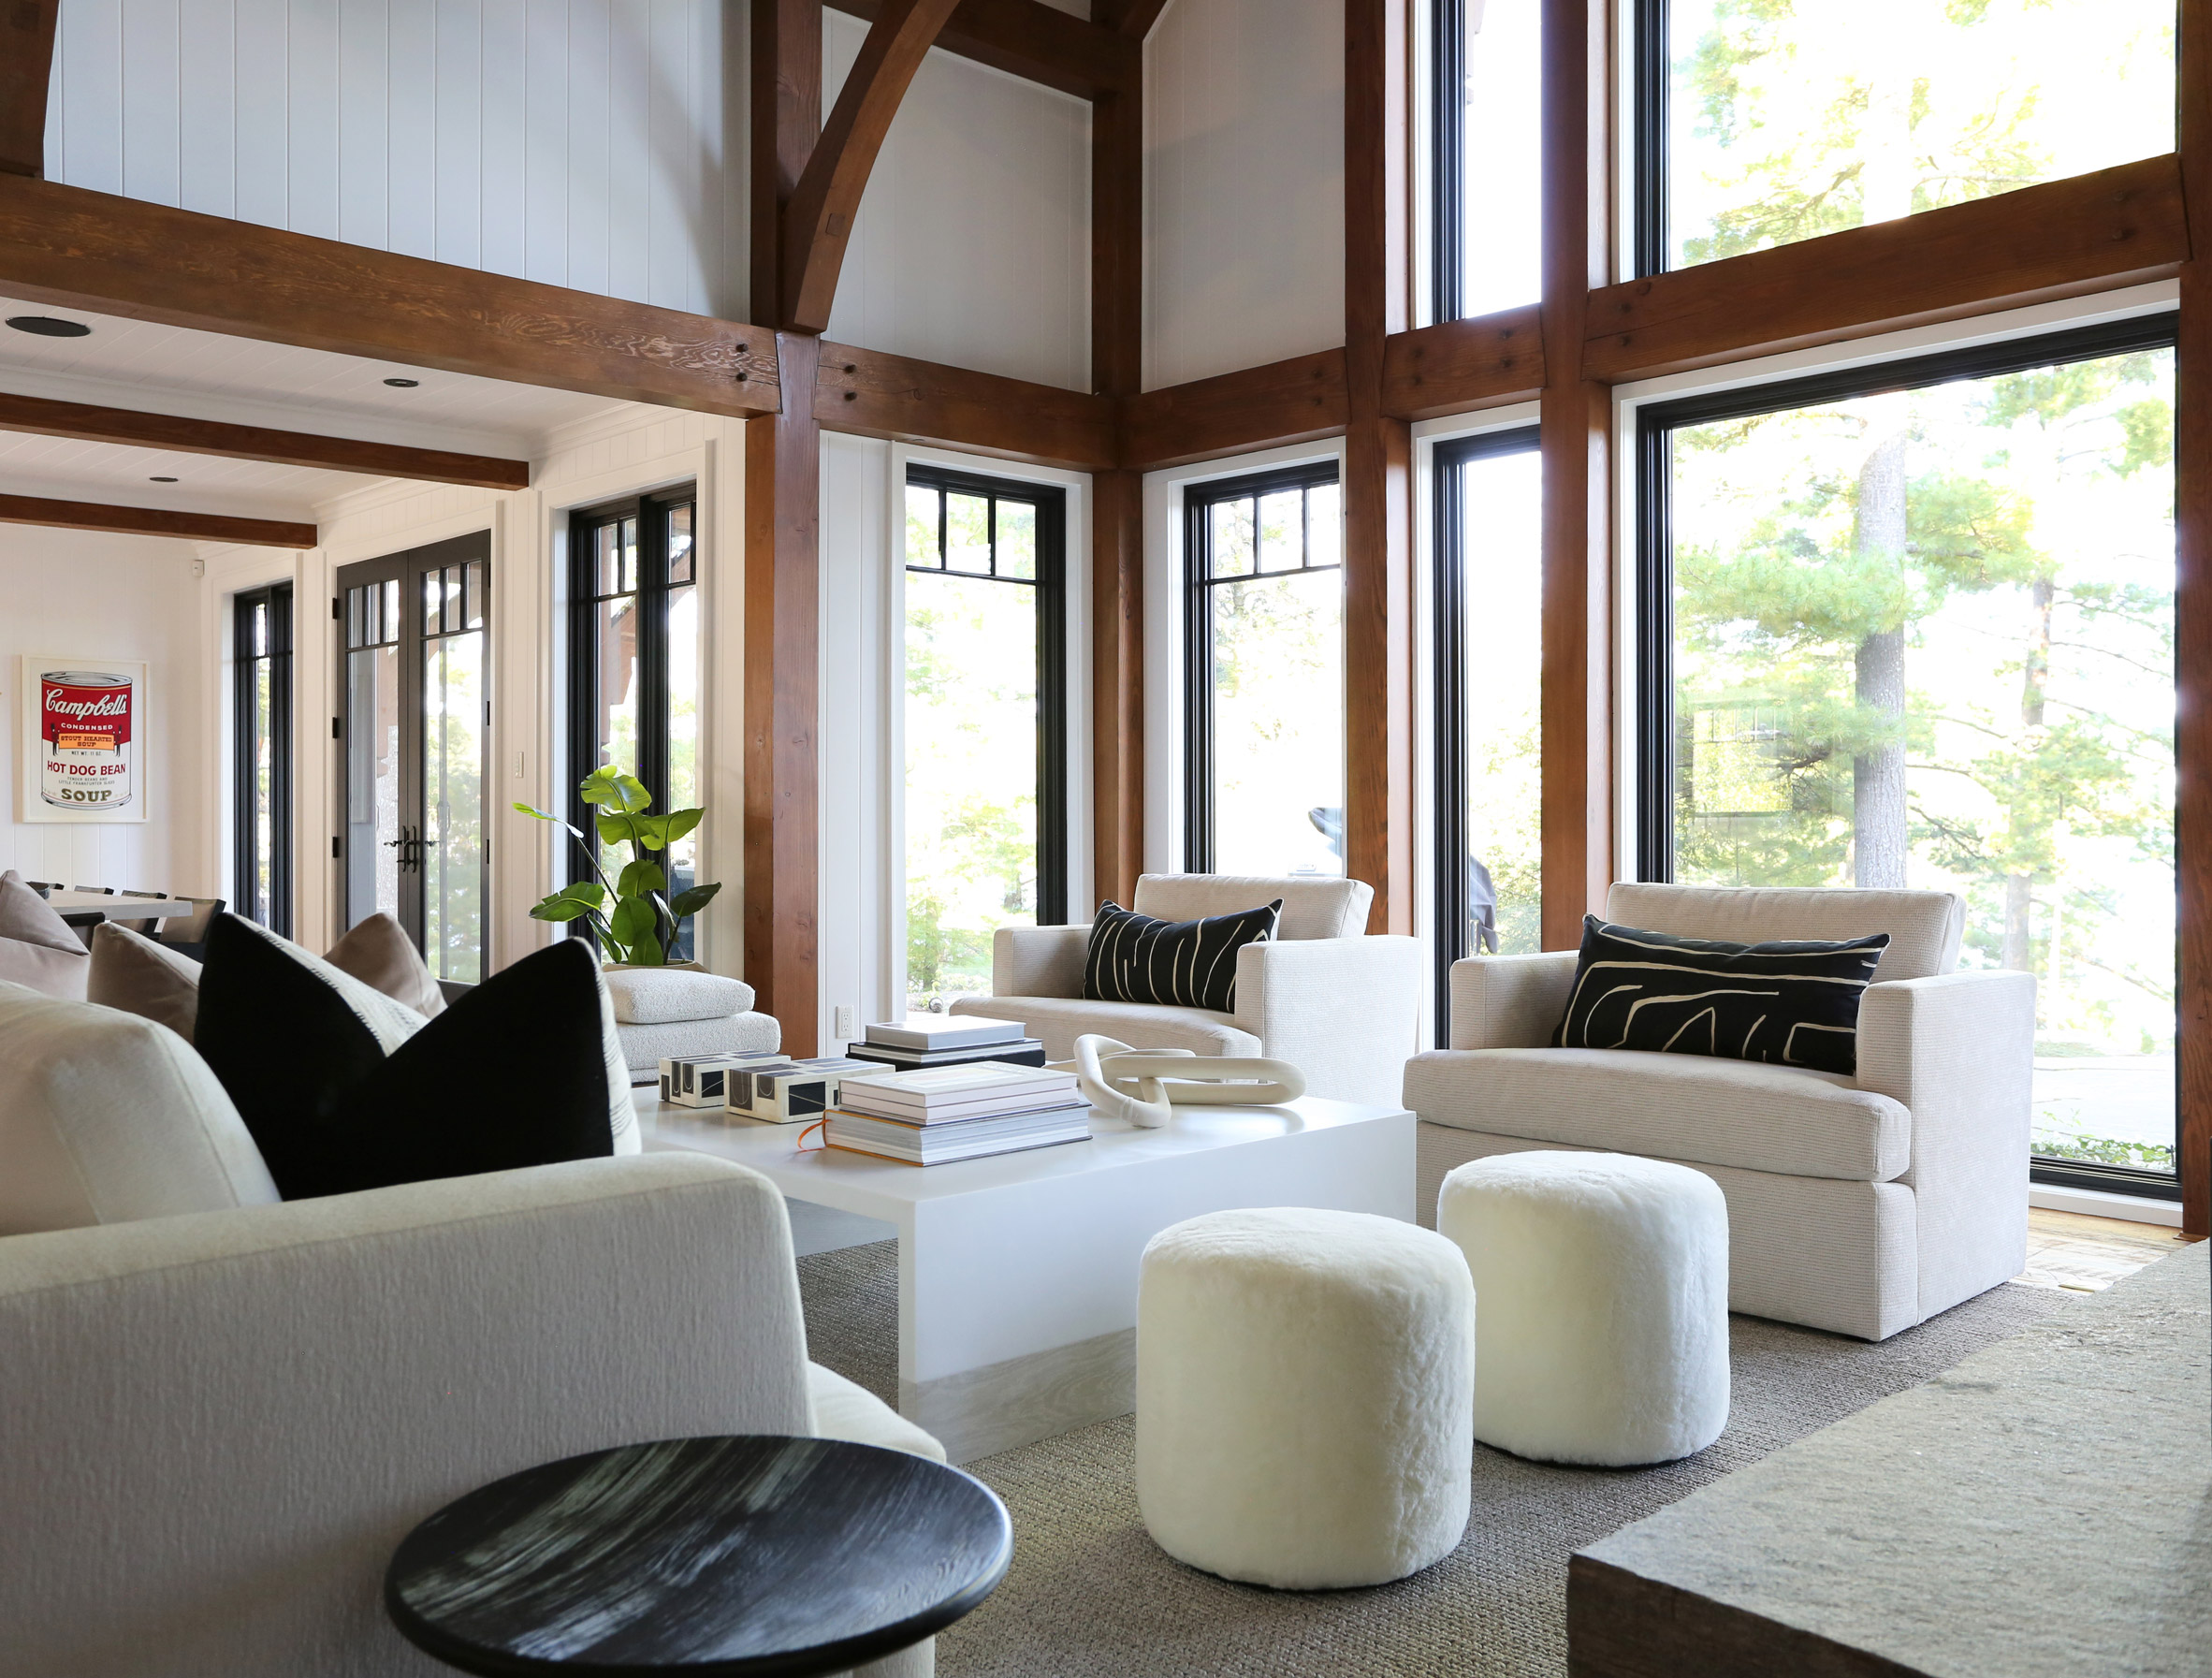 The Great Room's shearling poufs and armchairs